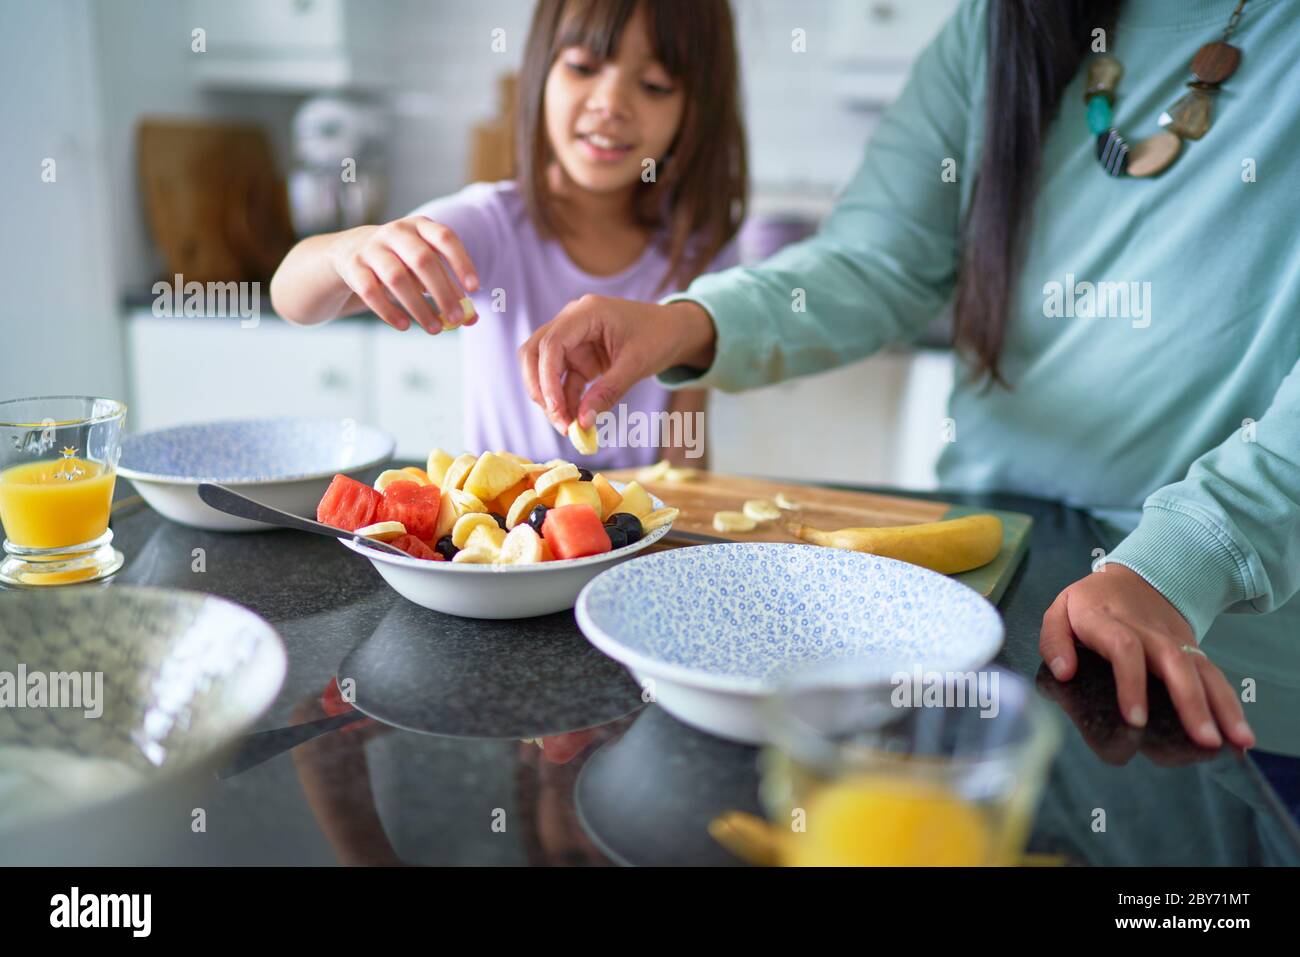 Mother and daughter eating fruit in kitchen Stock Photo